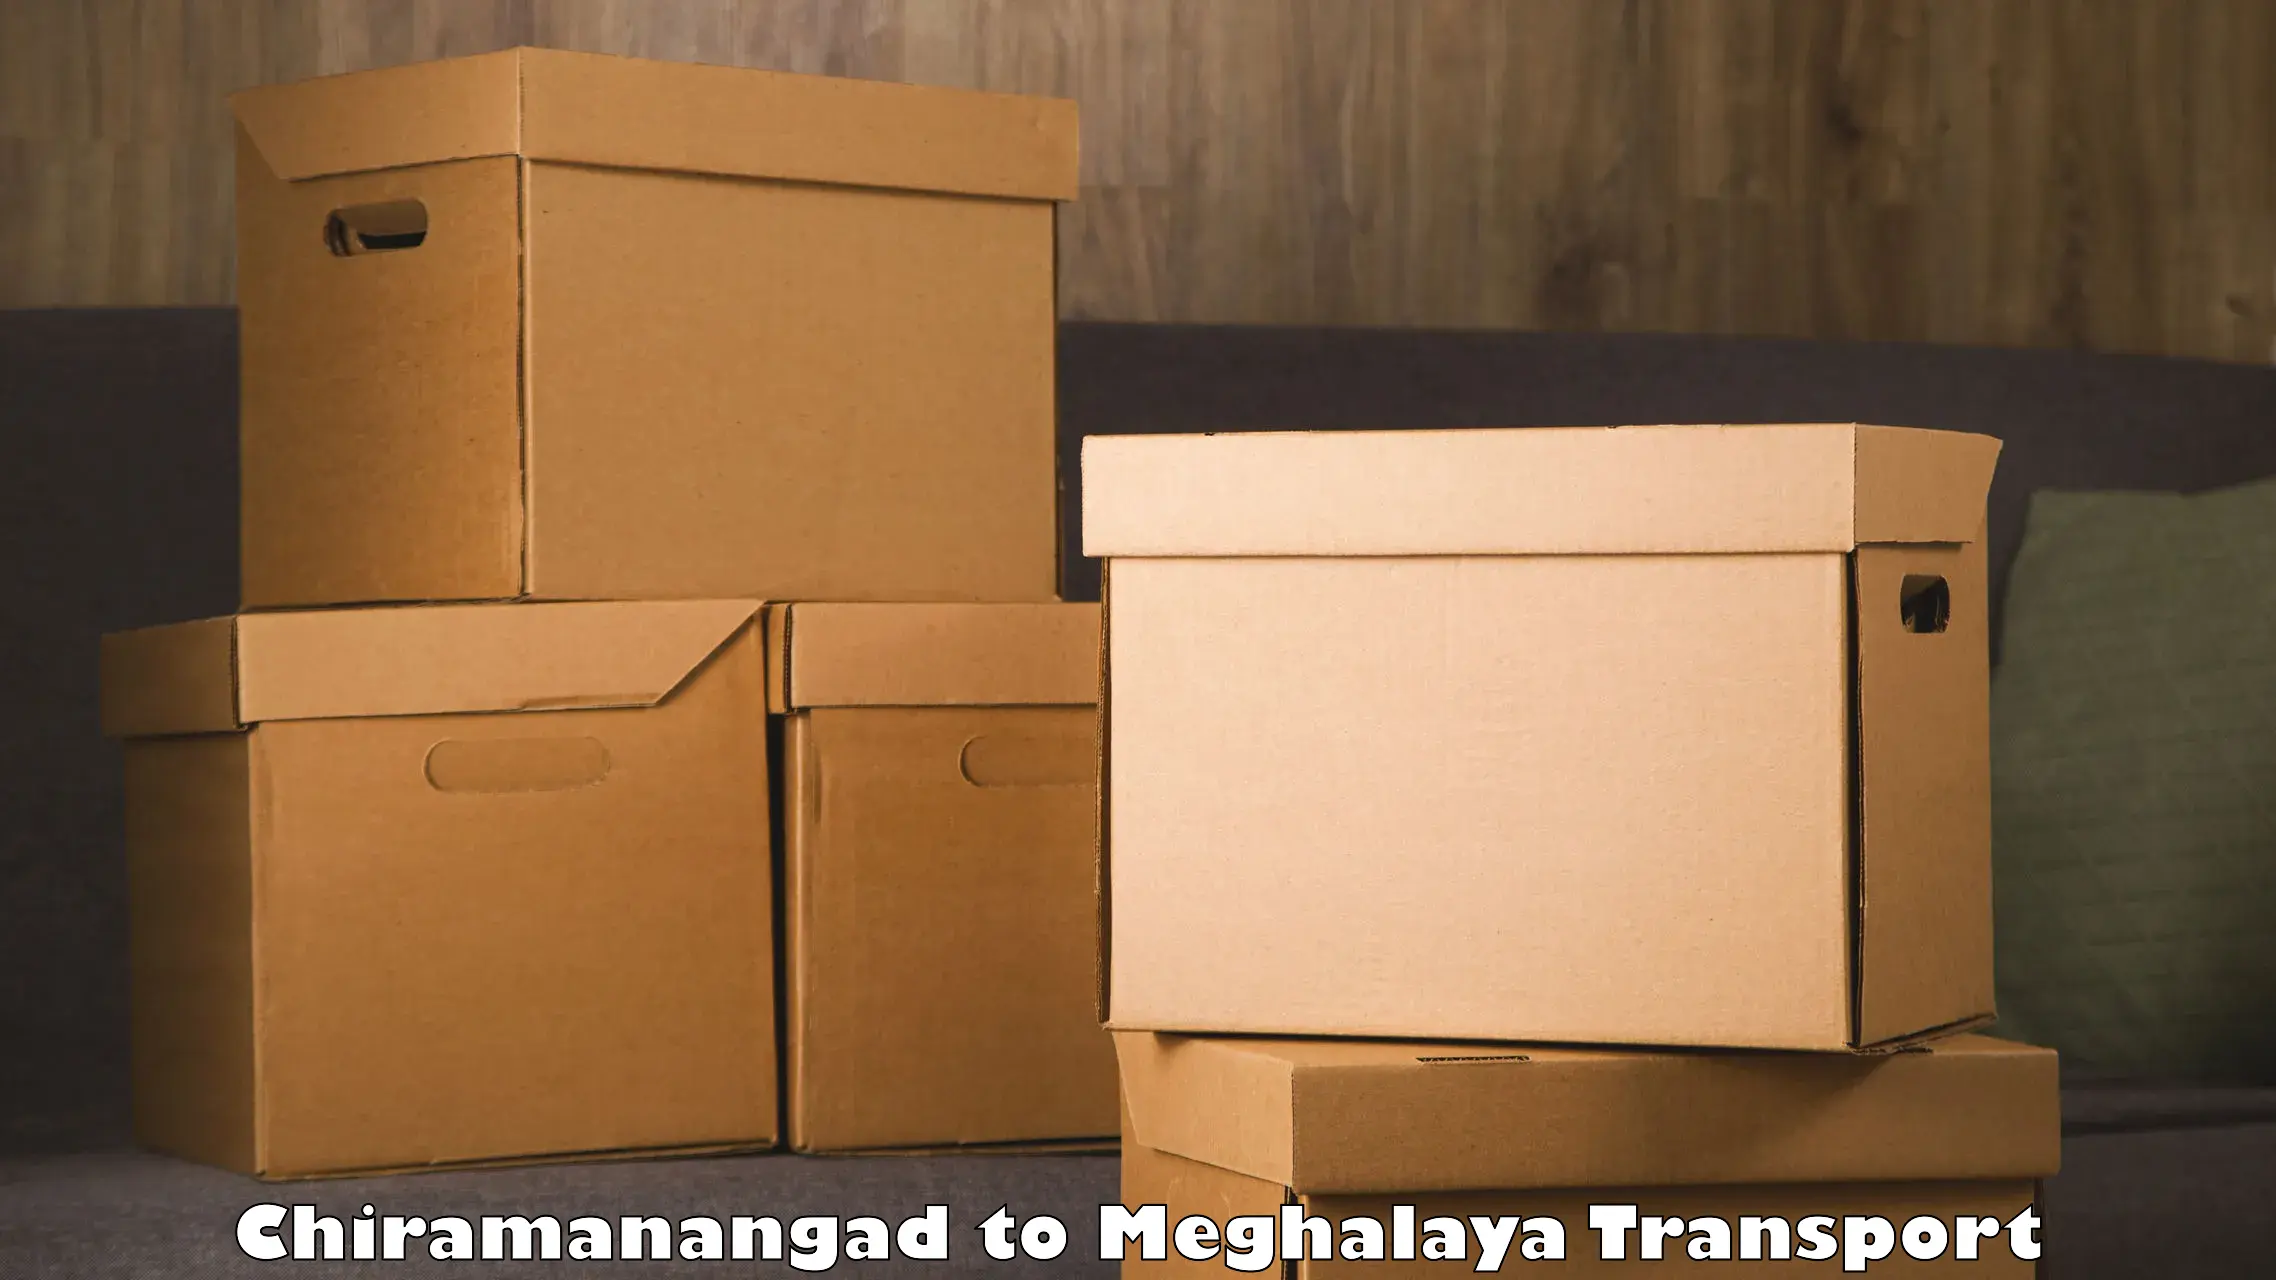 Road transport online services Chiramanangad to Shillong